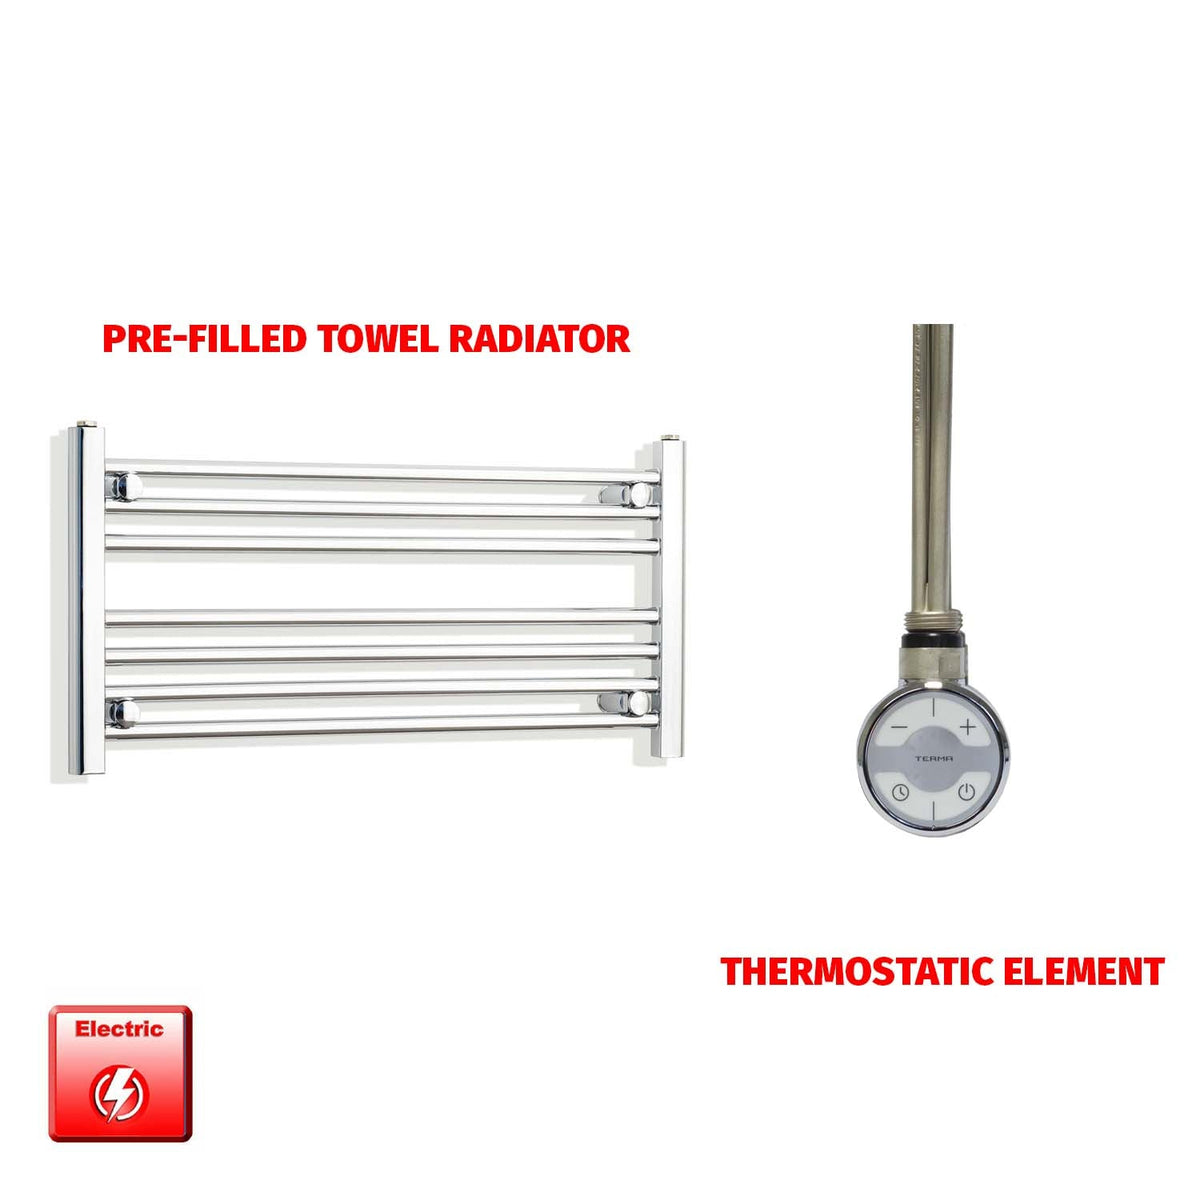 400 x 900 Pre-Filled Electric Heated Towel Radiator Straight Chrome MOA Thermosatic element no timer